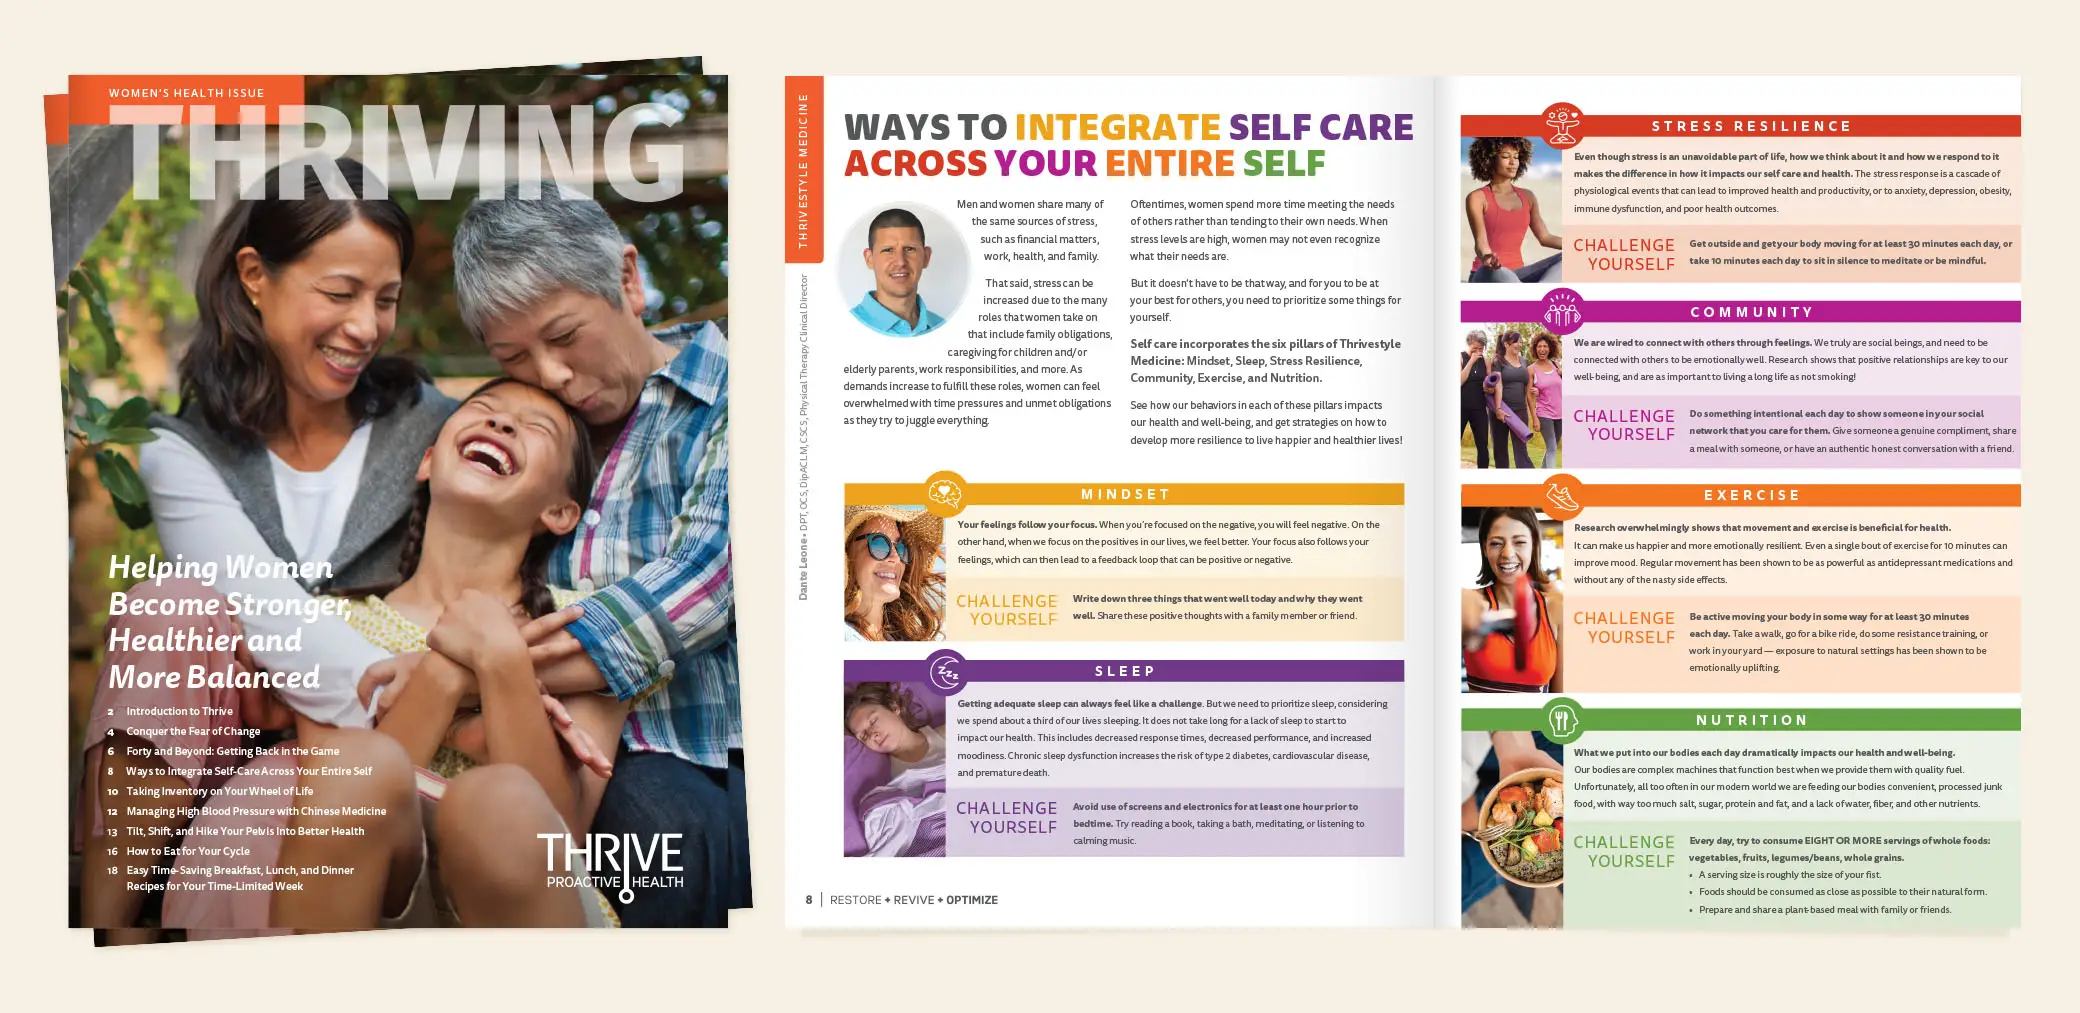 Thrive Proactive Health's Thriving Magazine design by Red Chalk Studios